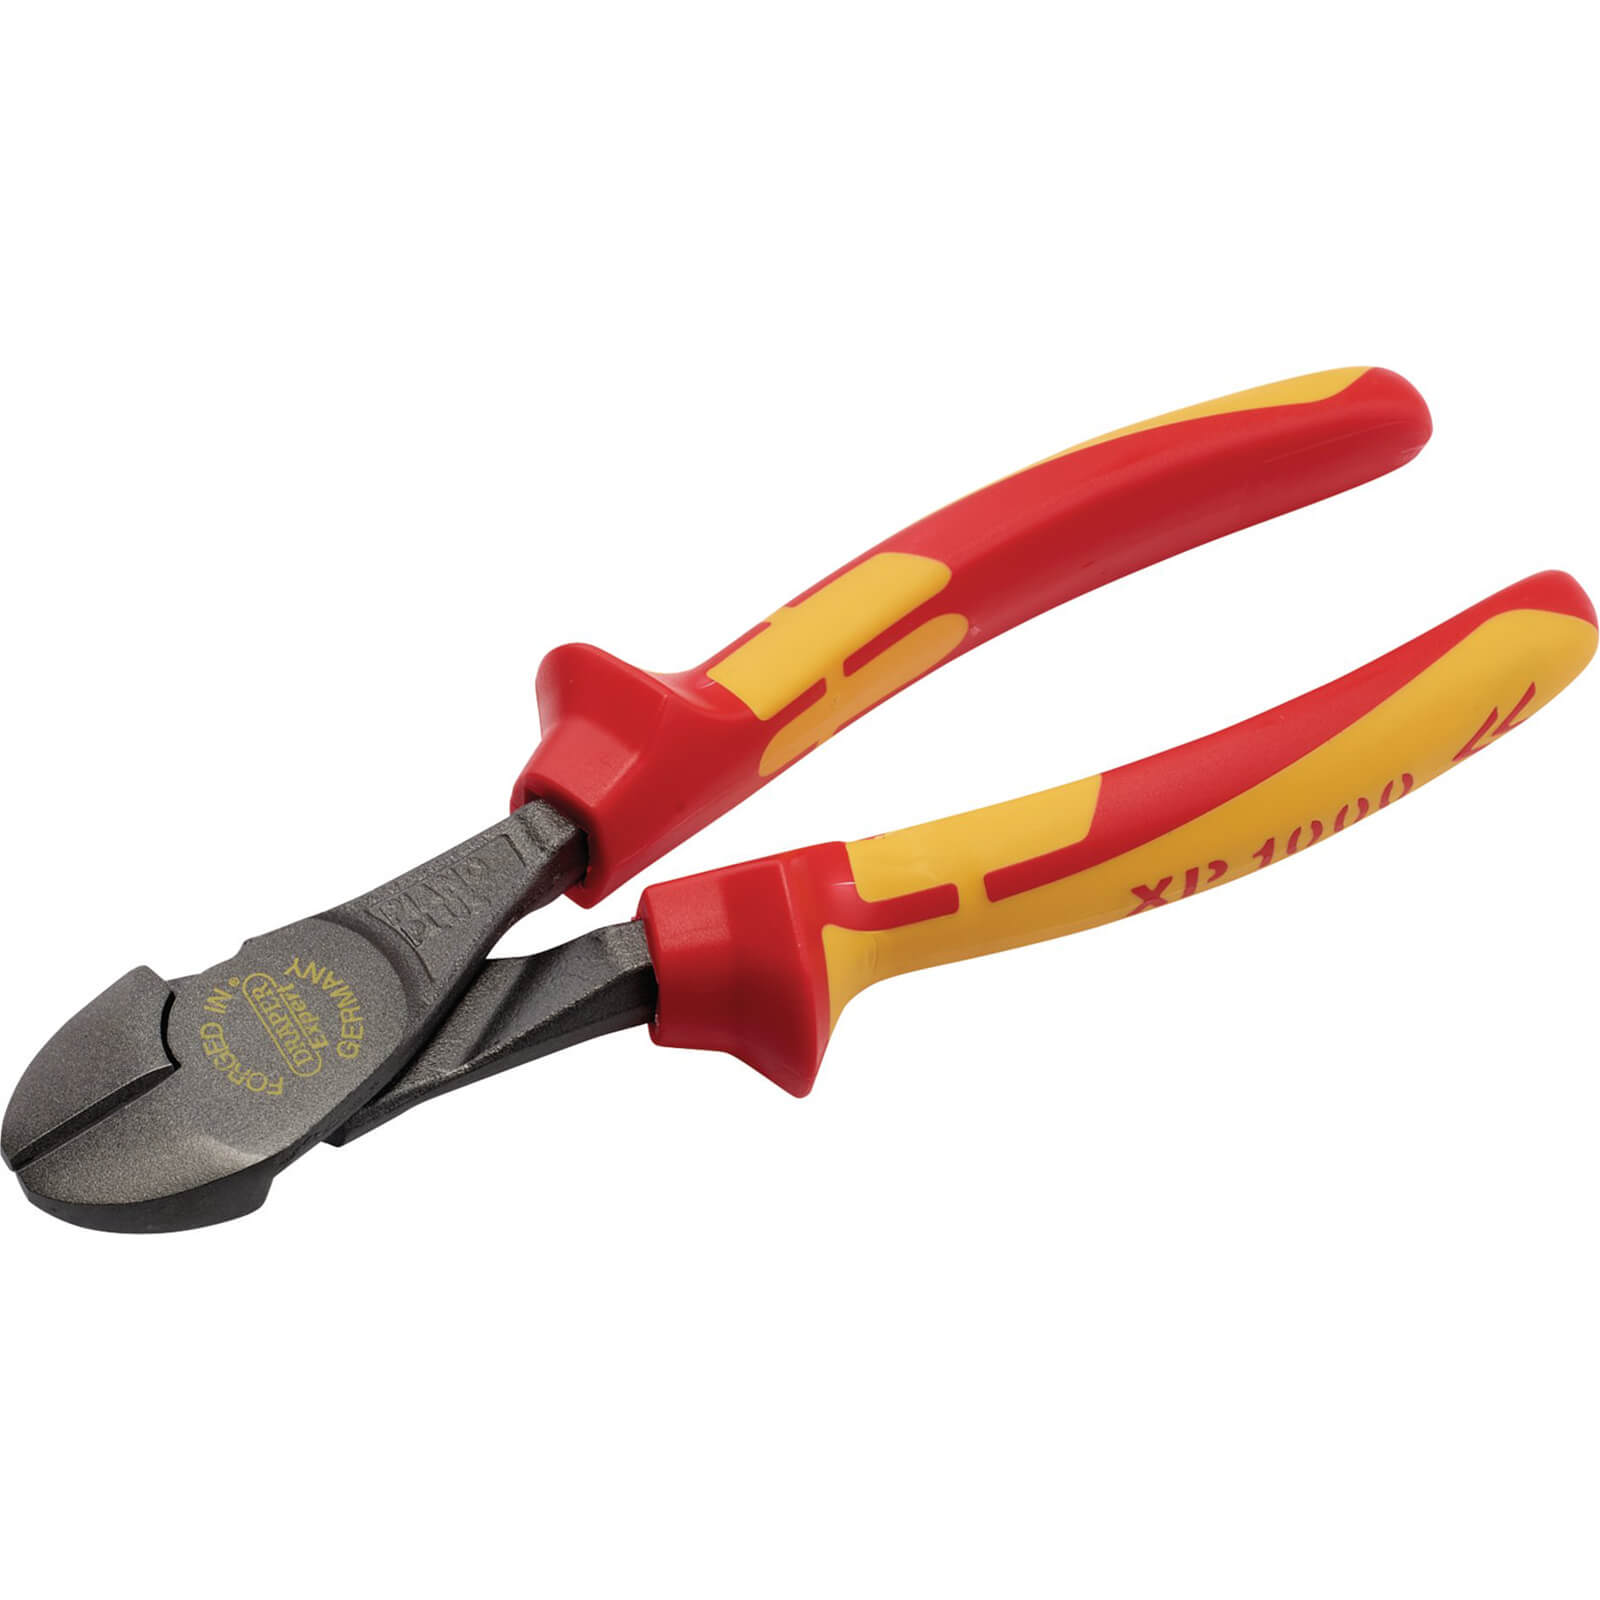 Image of Draper XP1000 VDE Insulated High Leverage Side Cutters 180mm